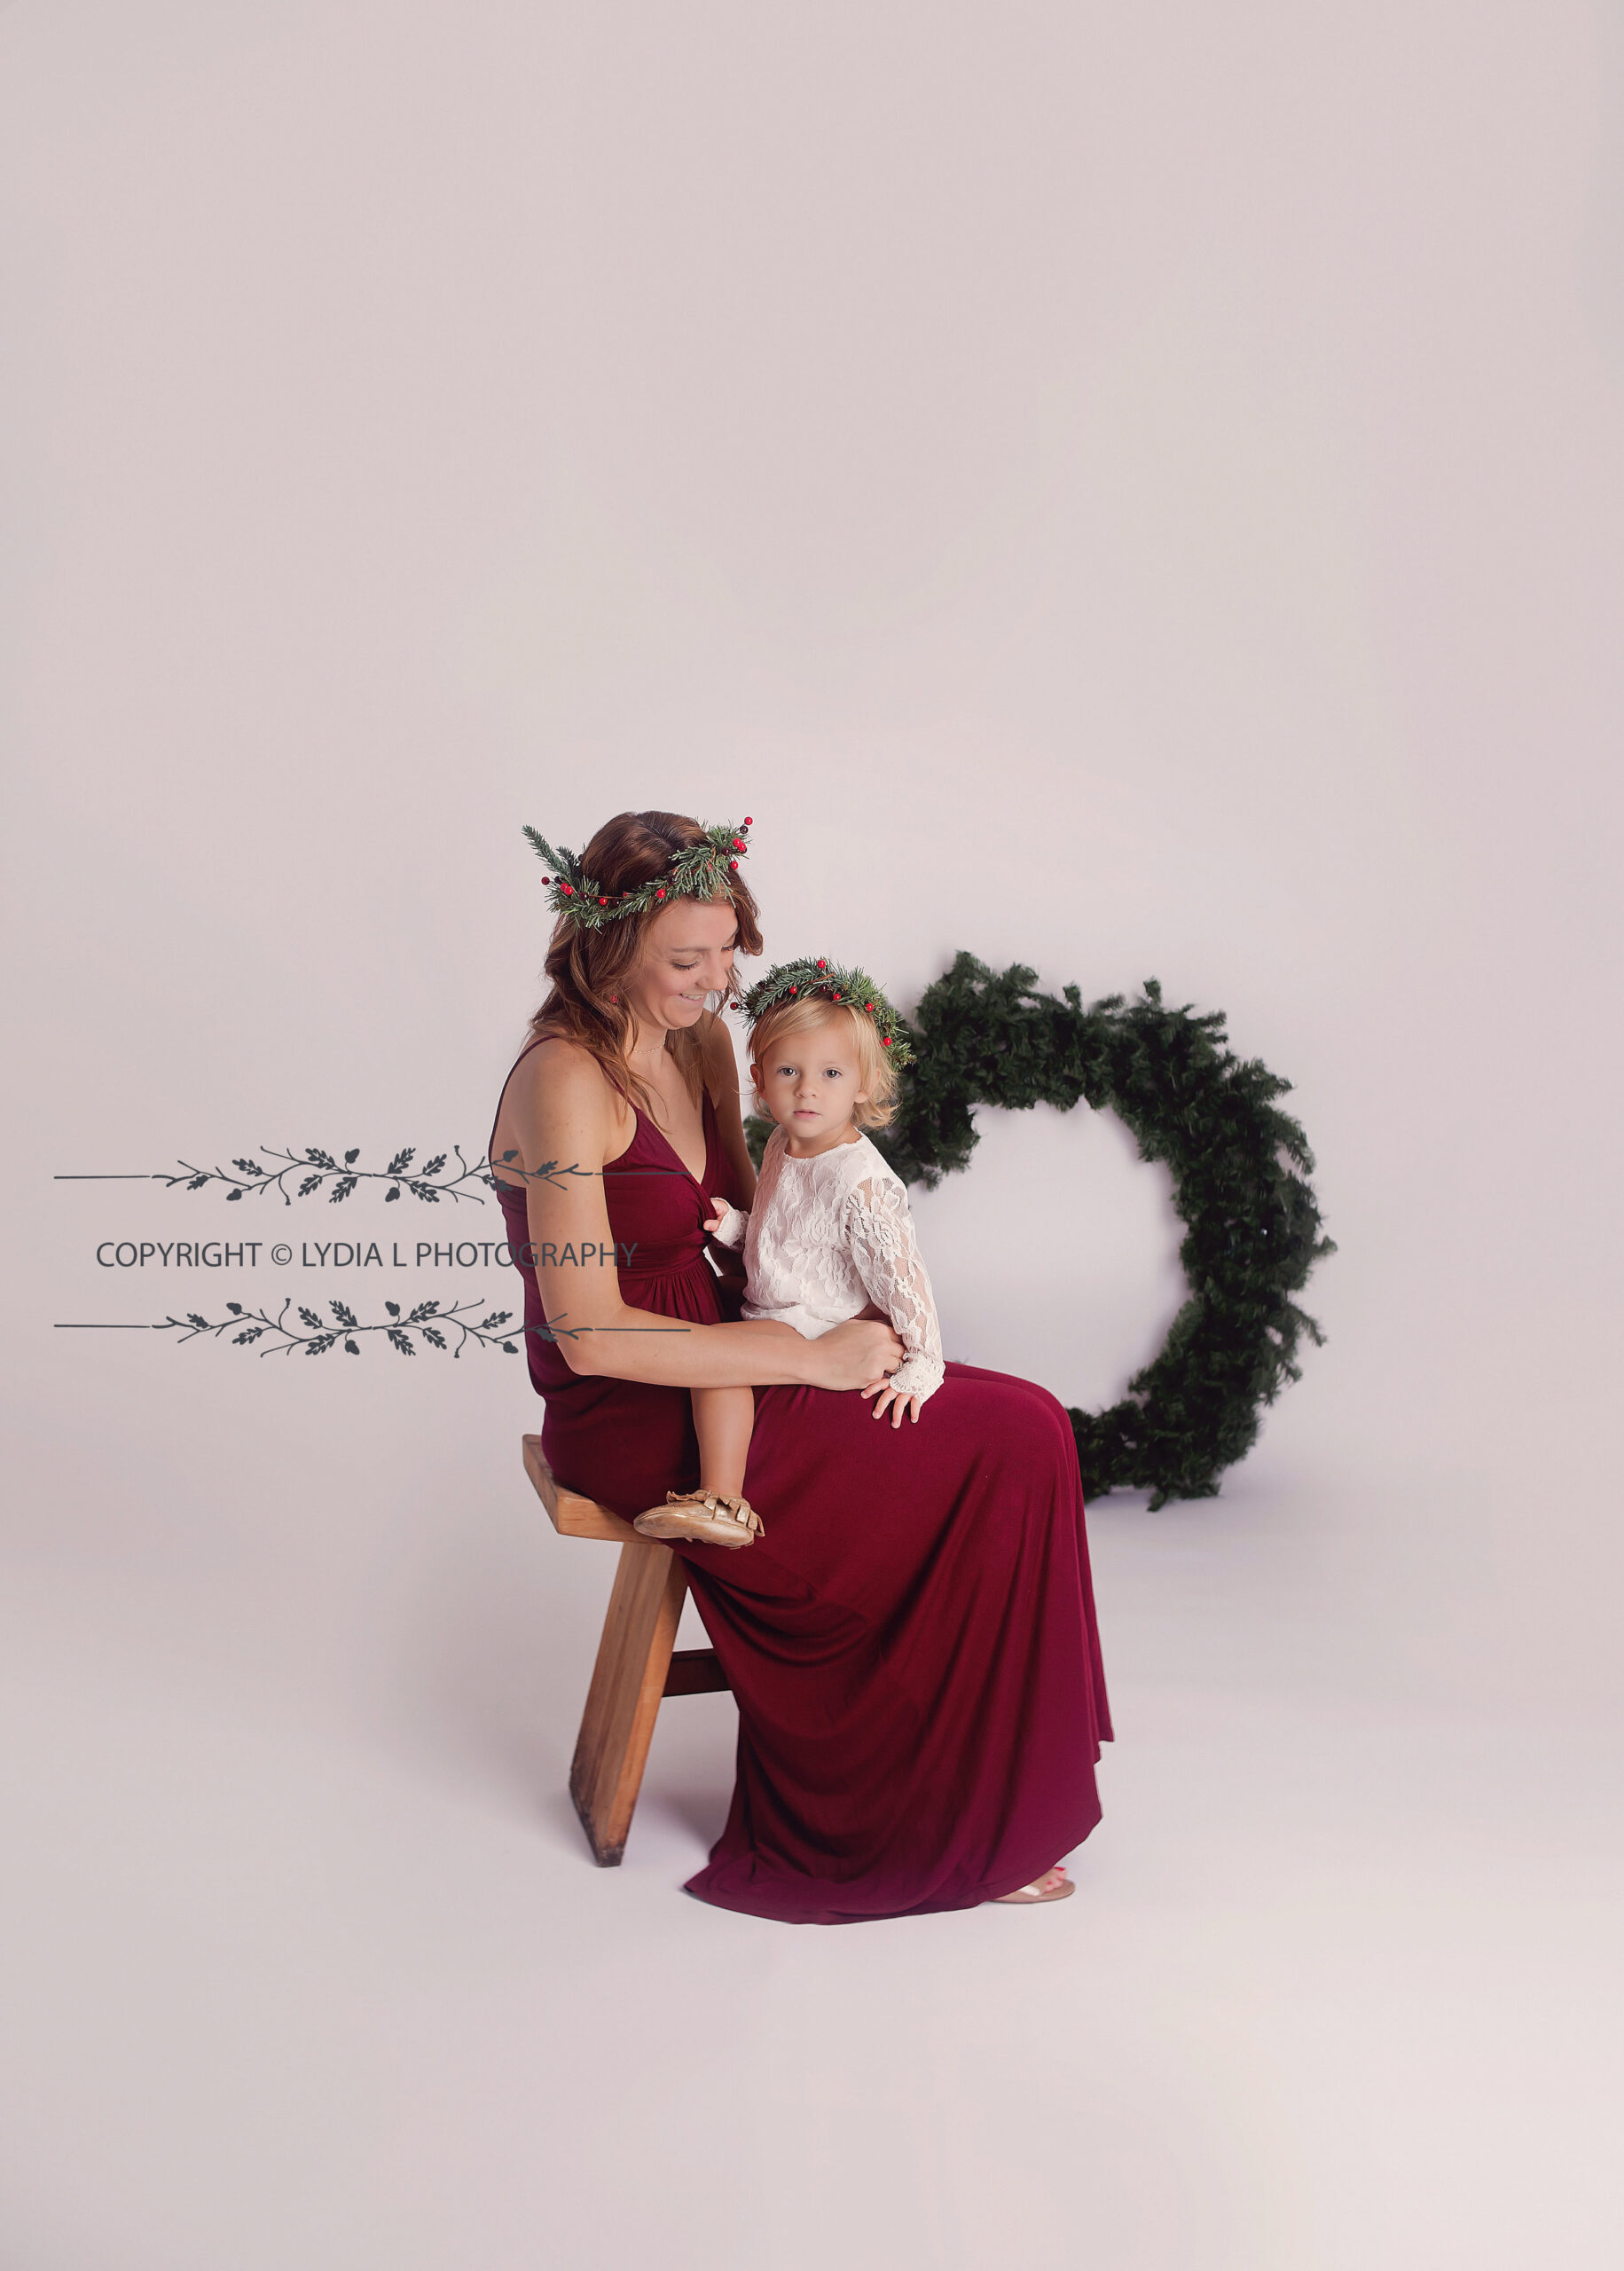 Mother and daughter, wreath, Christmas. Mount juliet tennessee